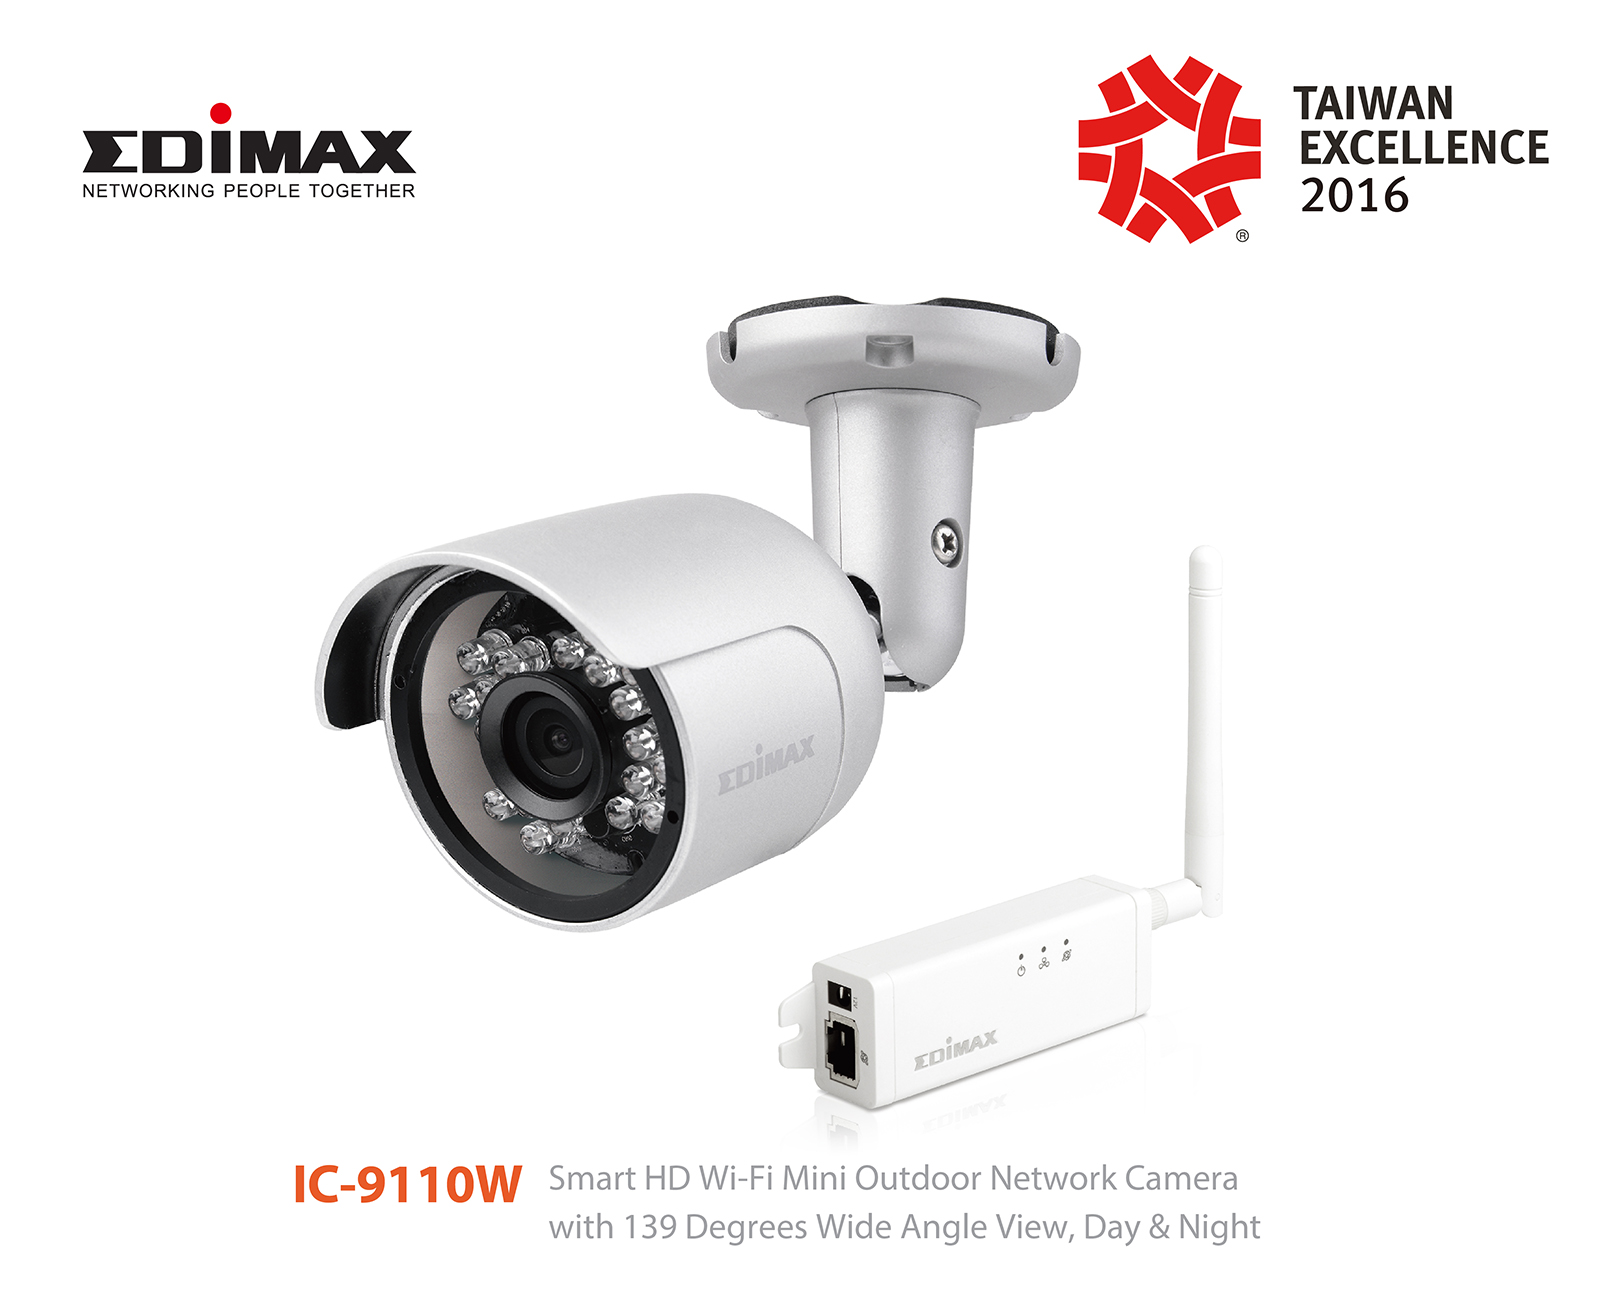 IC-9110W Taiwan Excellence 2016